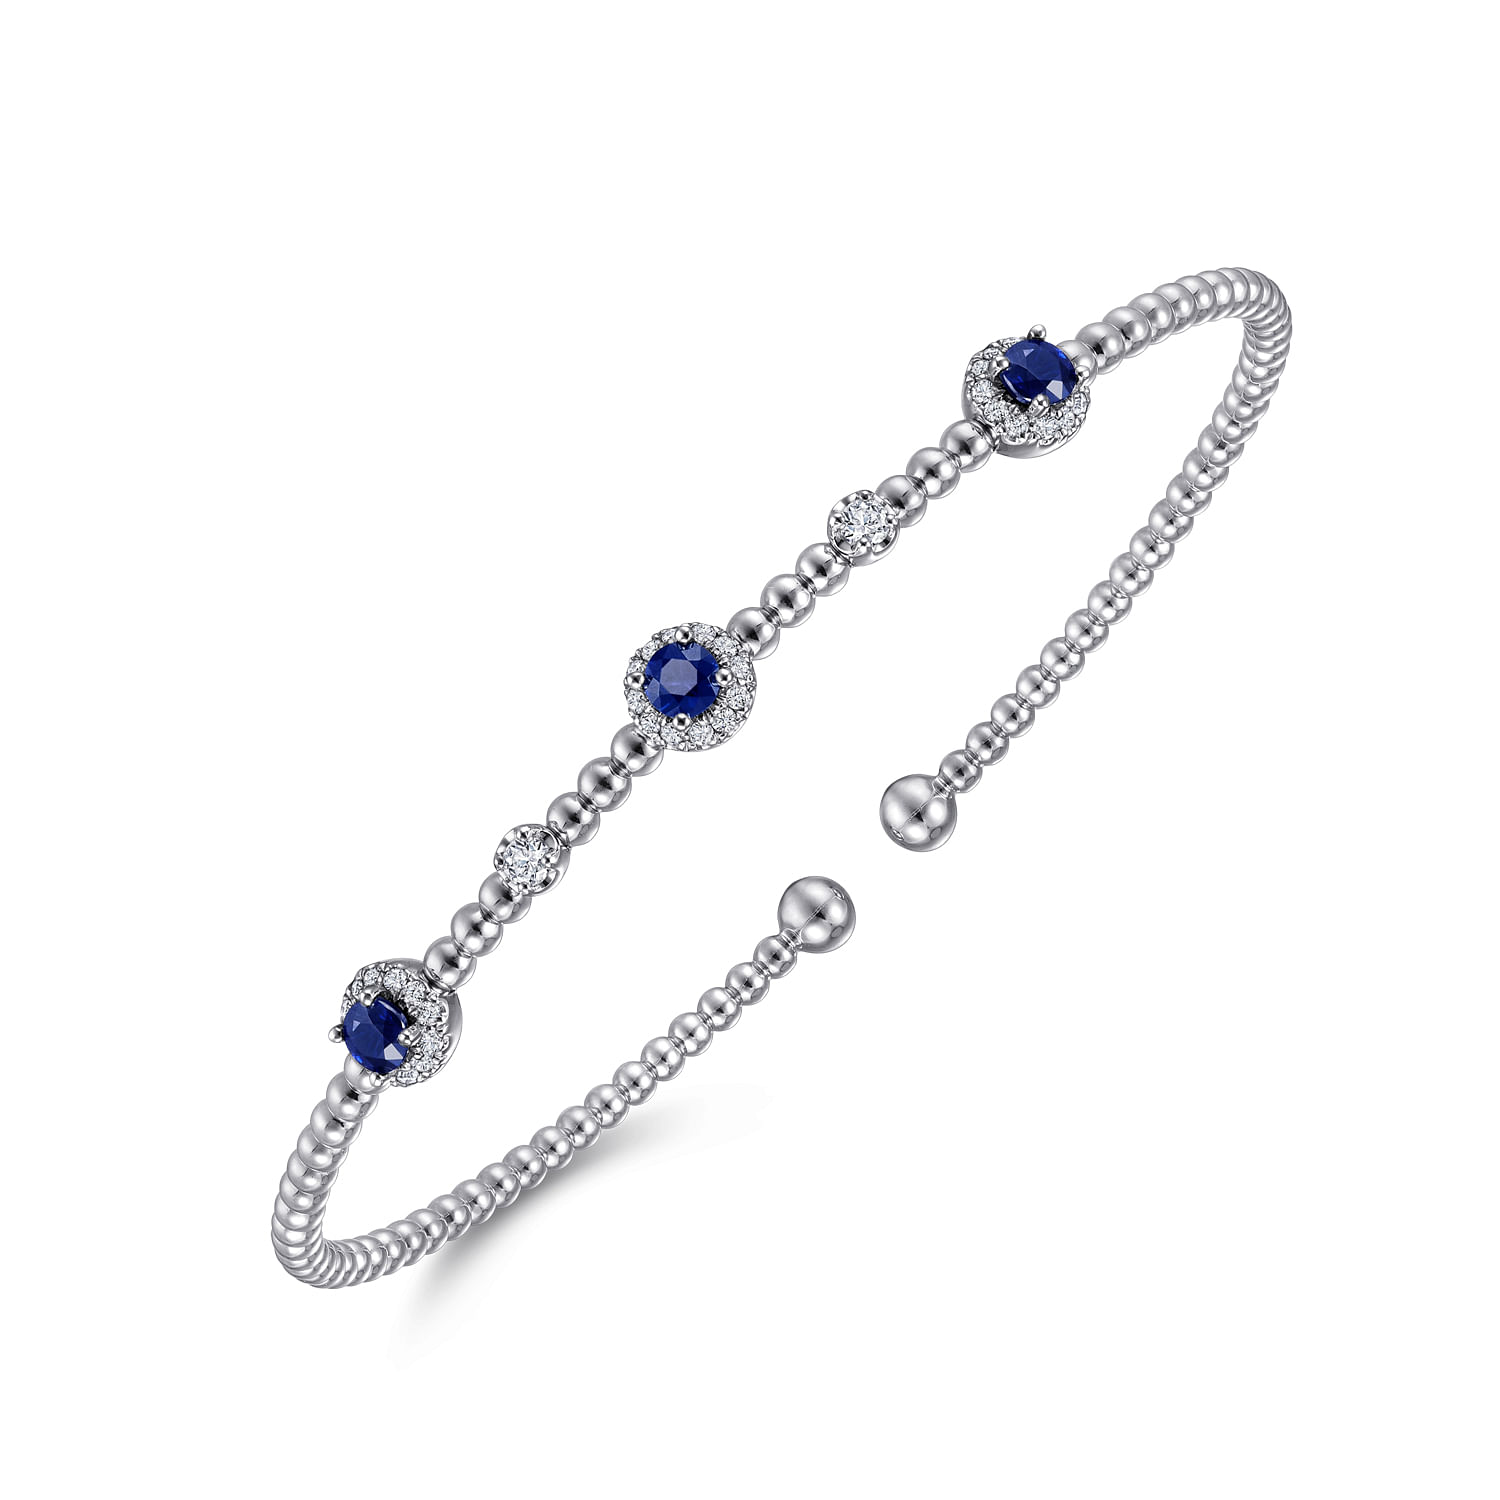 14K White Gold Bujukan Bead Cuff Bracelet with Sapphire and Diamond Halo Stations - 0.2 ct - Shot 2